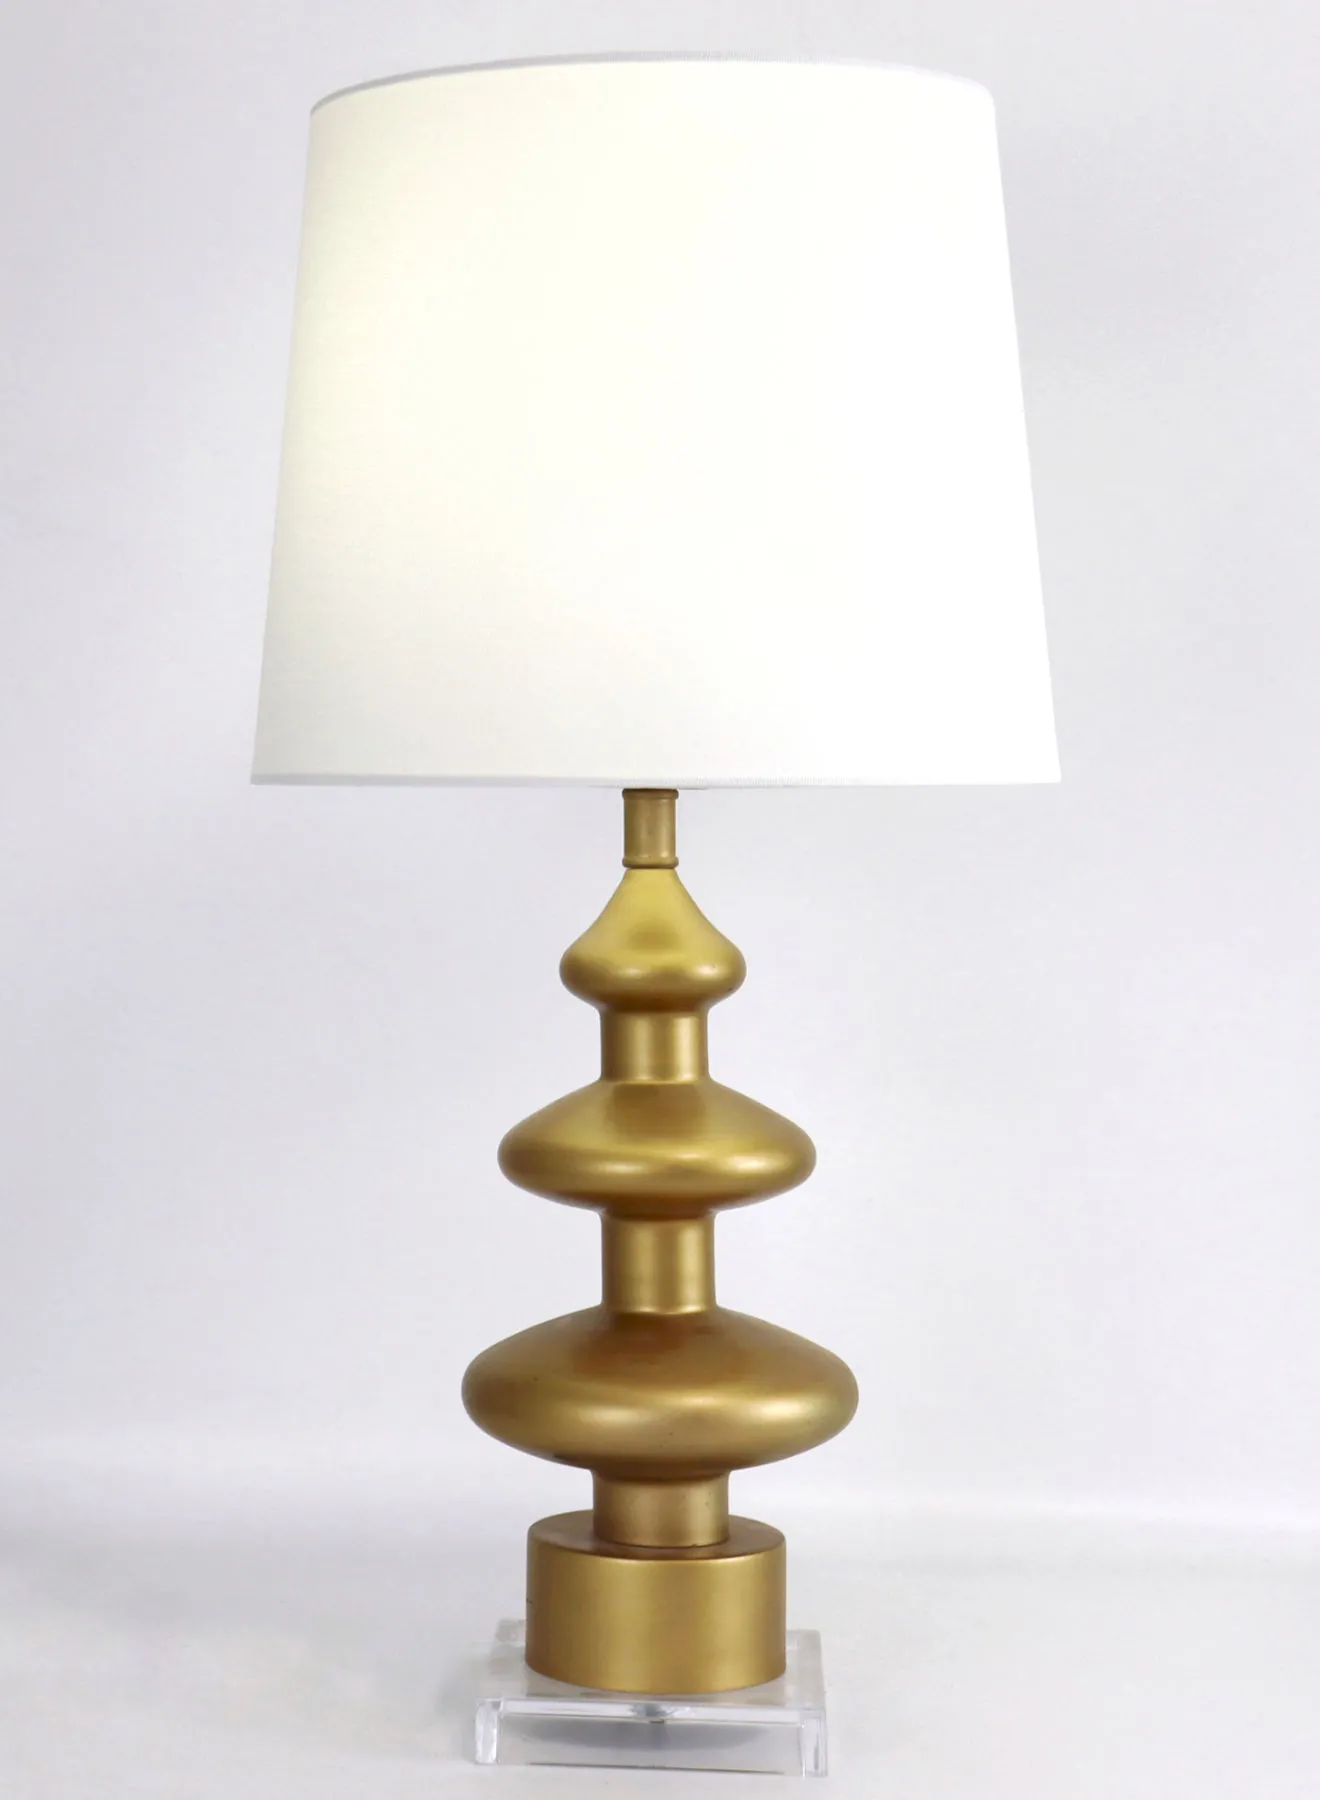 ebb & flow Modern Design Glass Table Lamp Unique Luxury Quality Material for the Perfect Stylish Home RSN71047 Gold 11.8 x 24.4